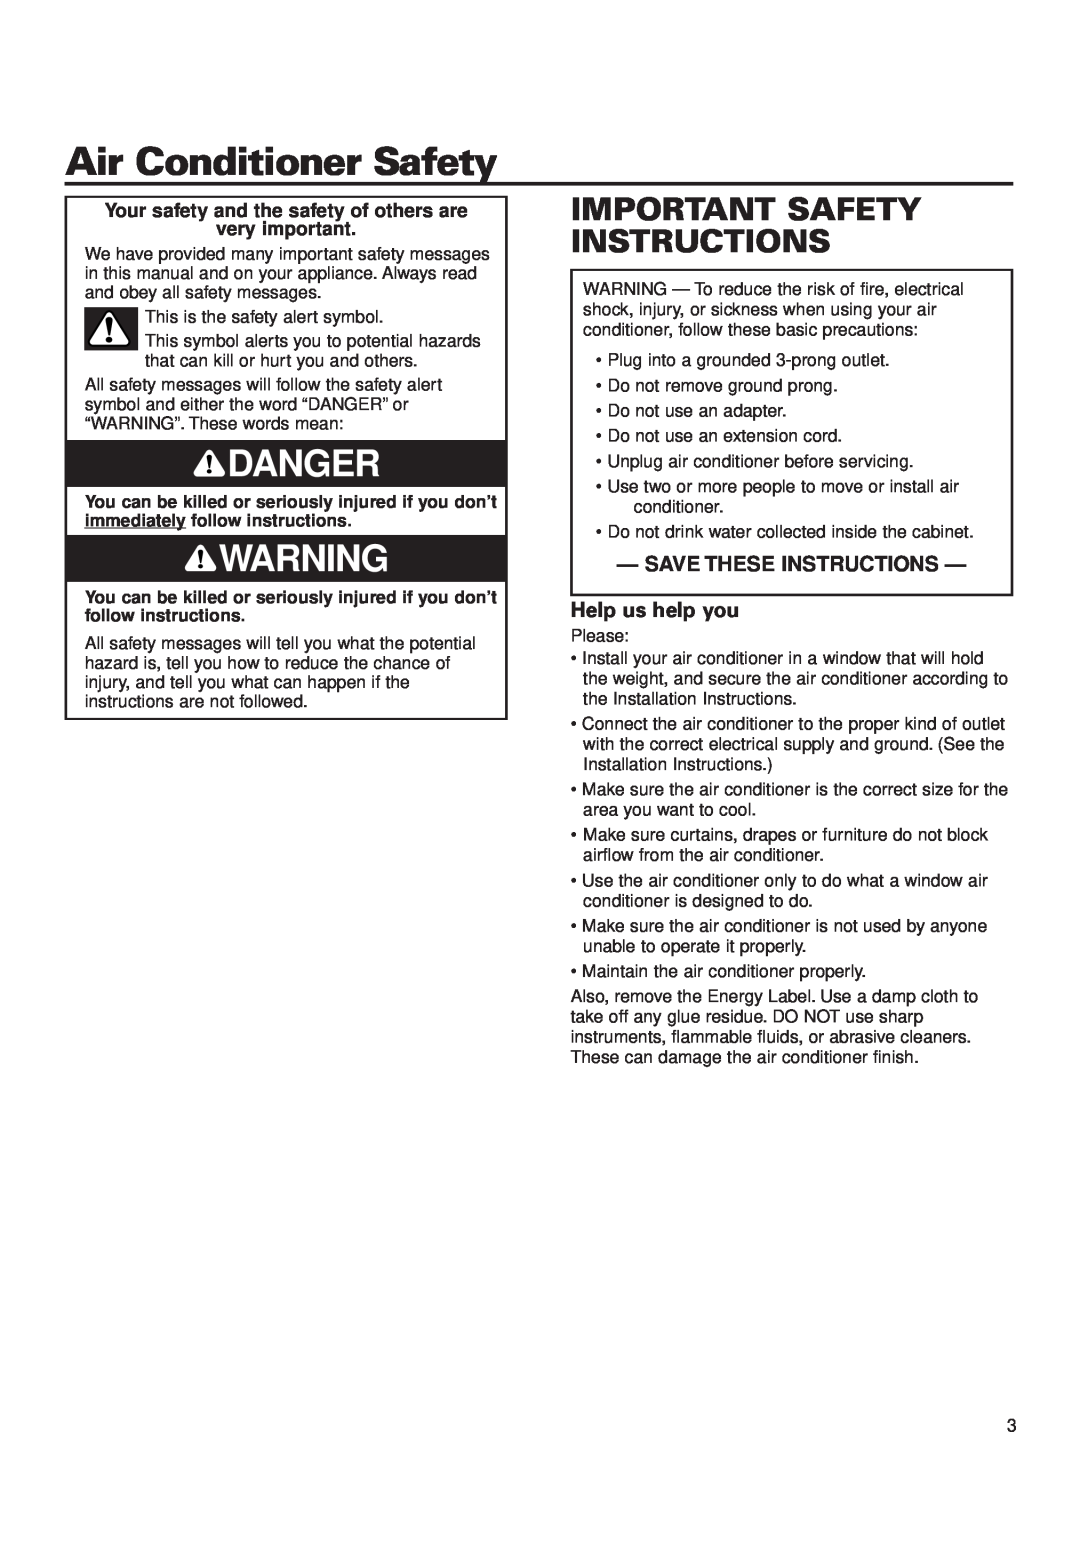 Whirlpool CA5WMK0 Air Conditioner Safety, Danger, Important Safety Instructions, Save These Instructions, Help us help you 